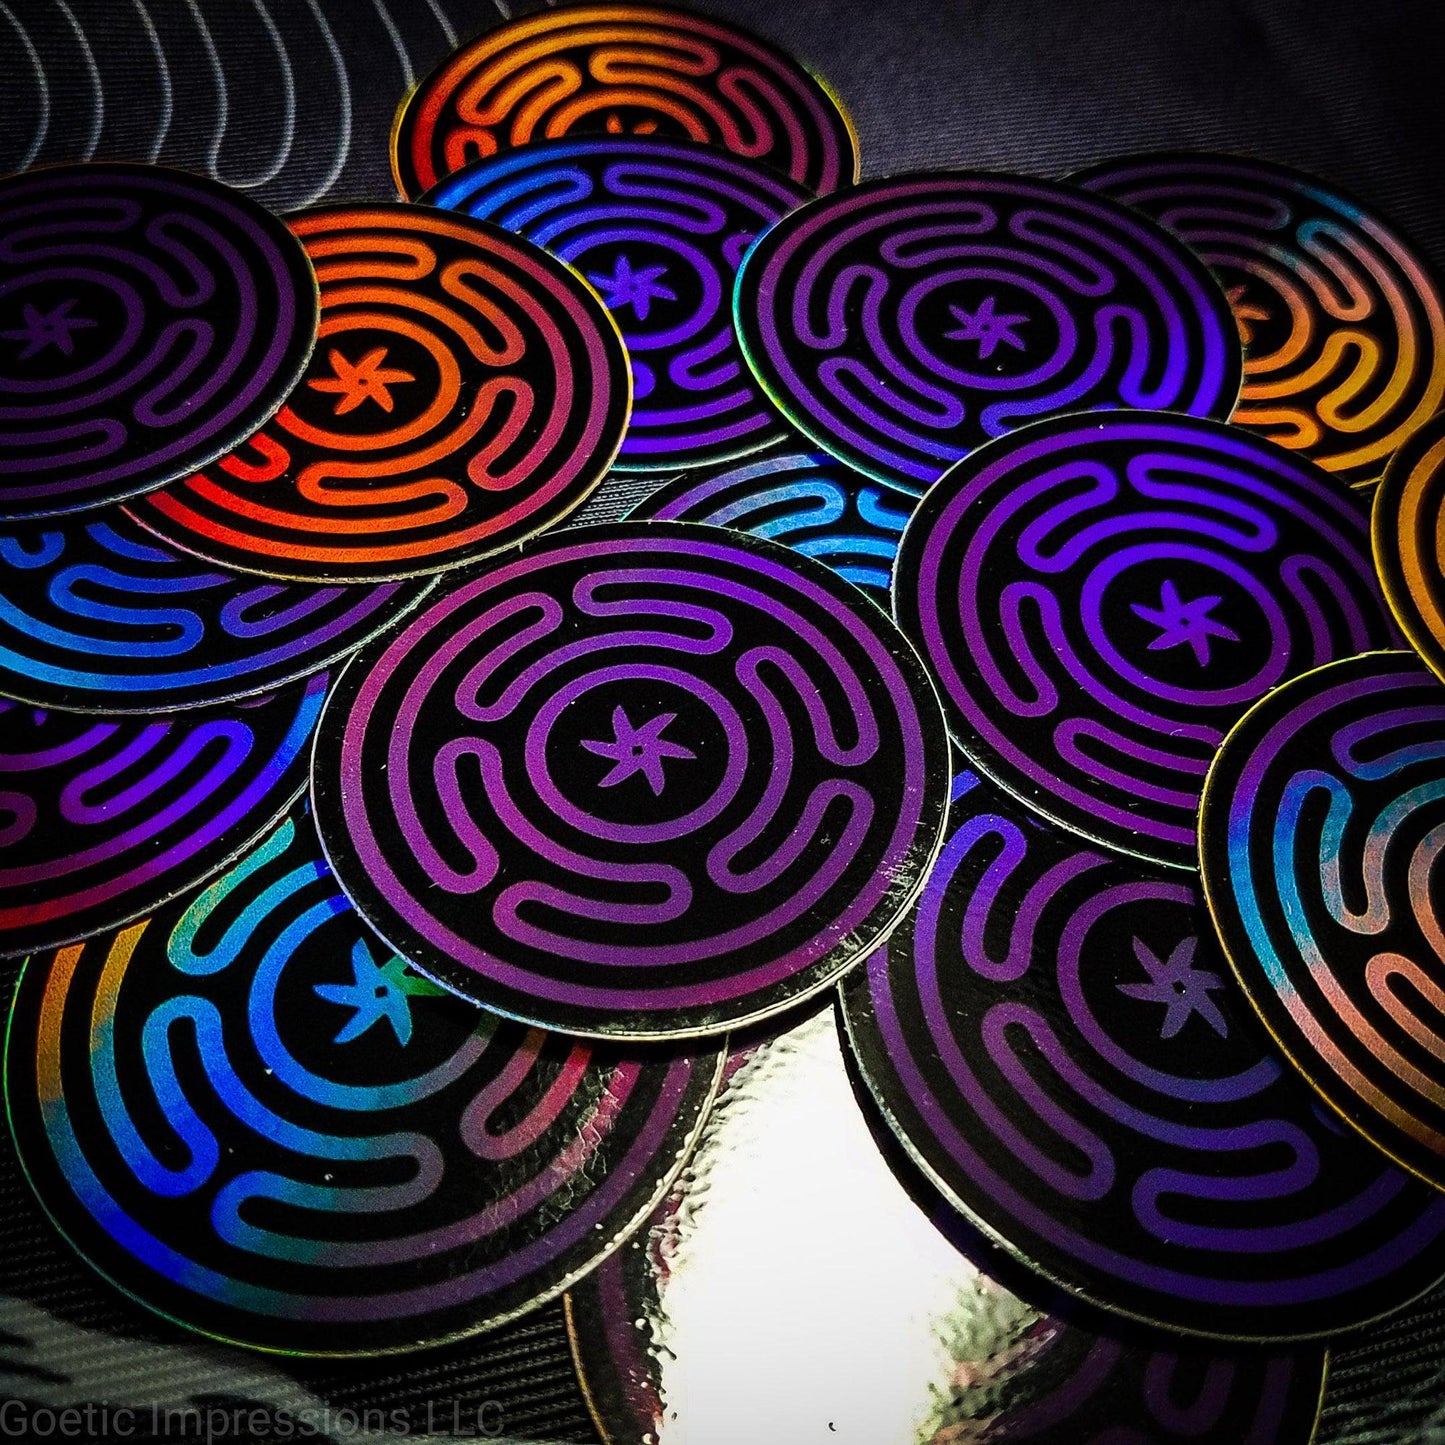 A pile of Holographic stickers featuring the wheel of Hecate or Stropholos. The base color of the sigil is purple on a black background.